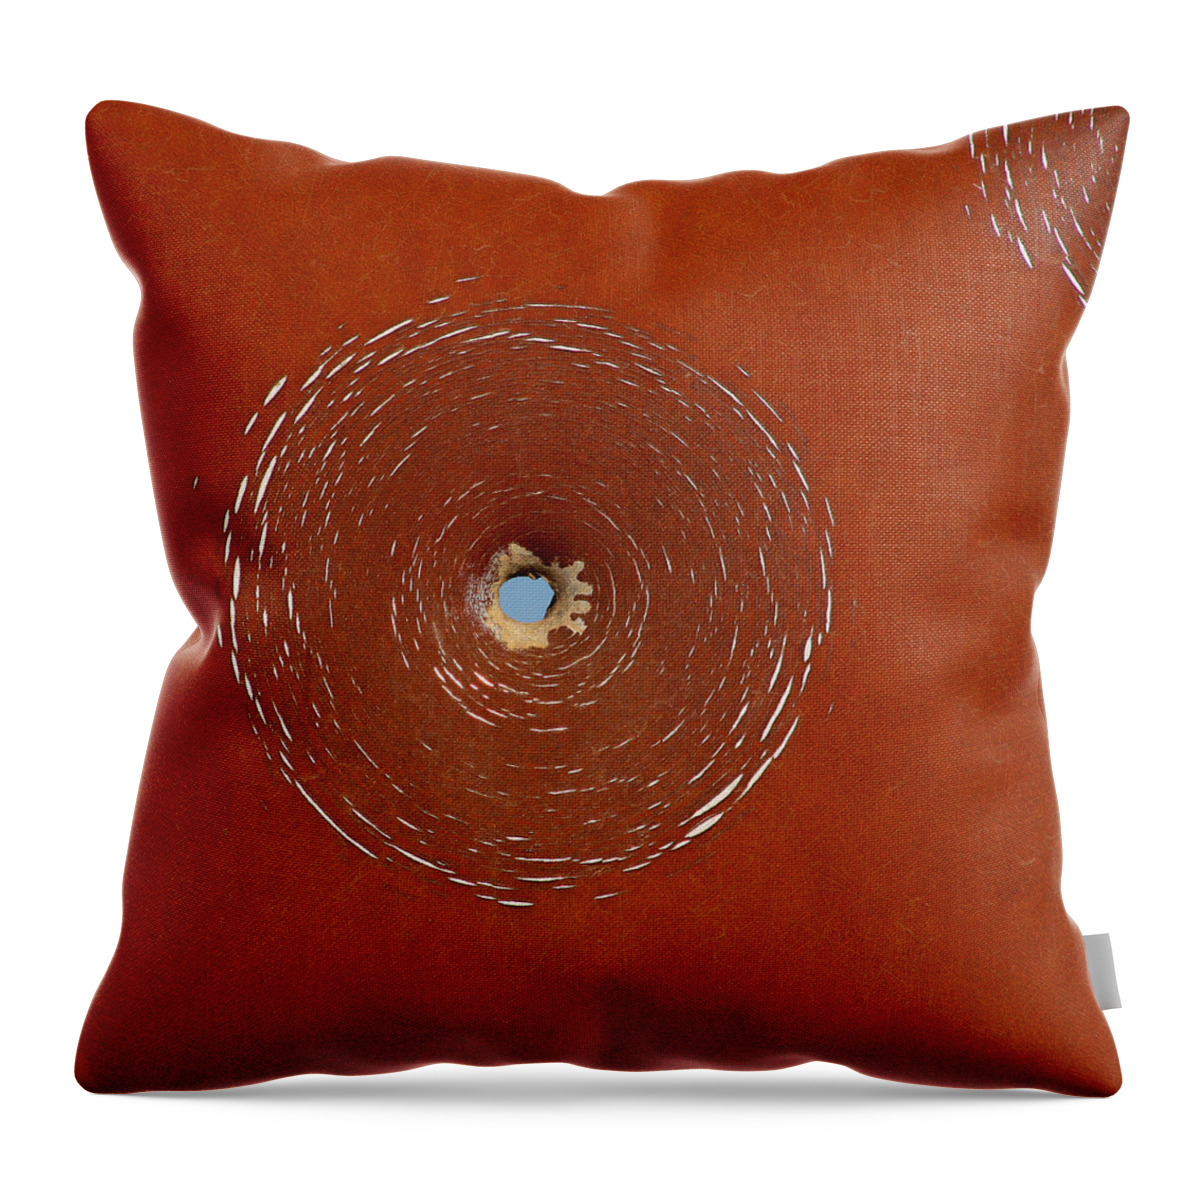 Bullet Throw Pillow featuring the photograph Bullet Hole Patterns by Art Block Collections